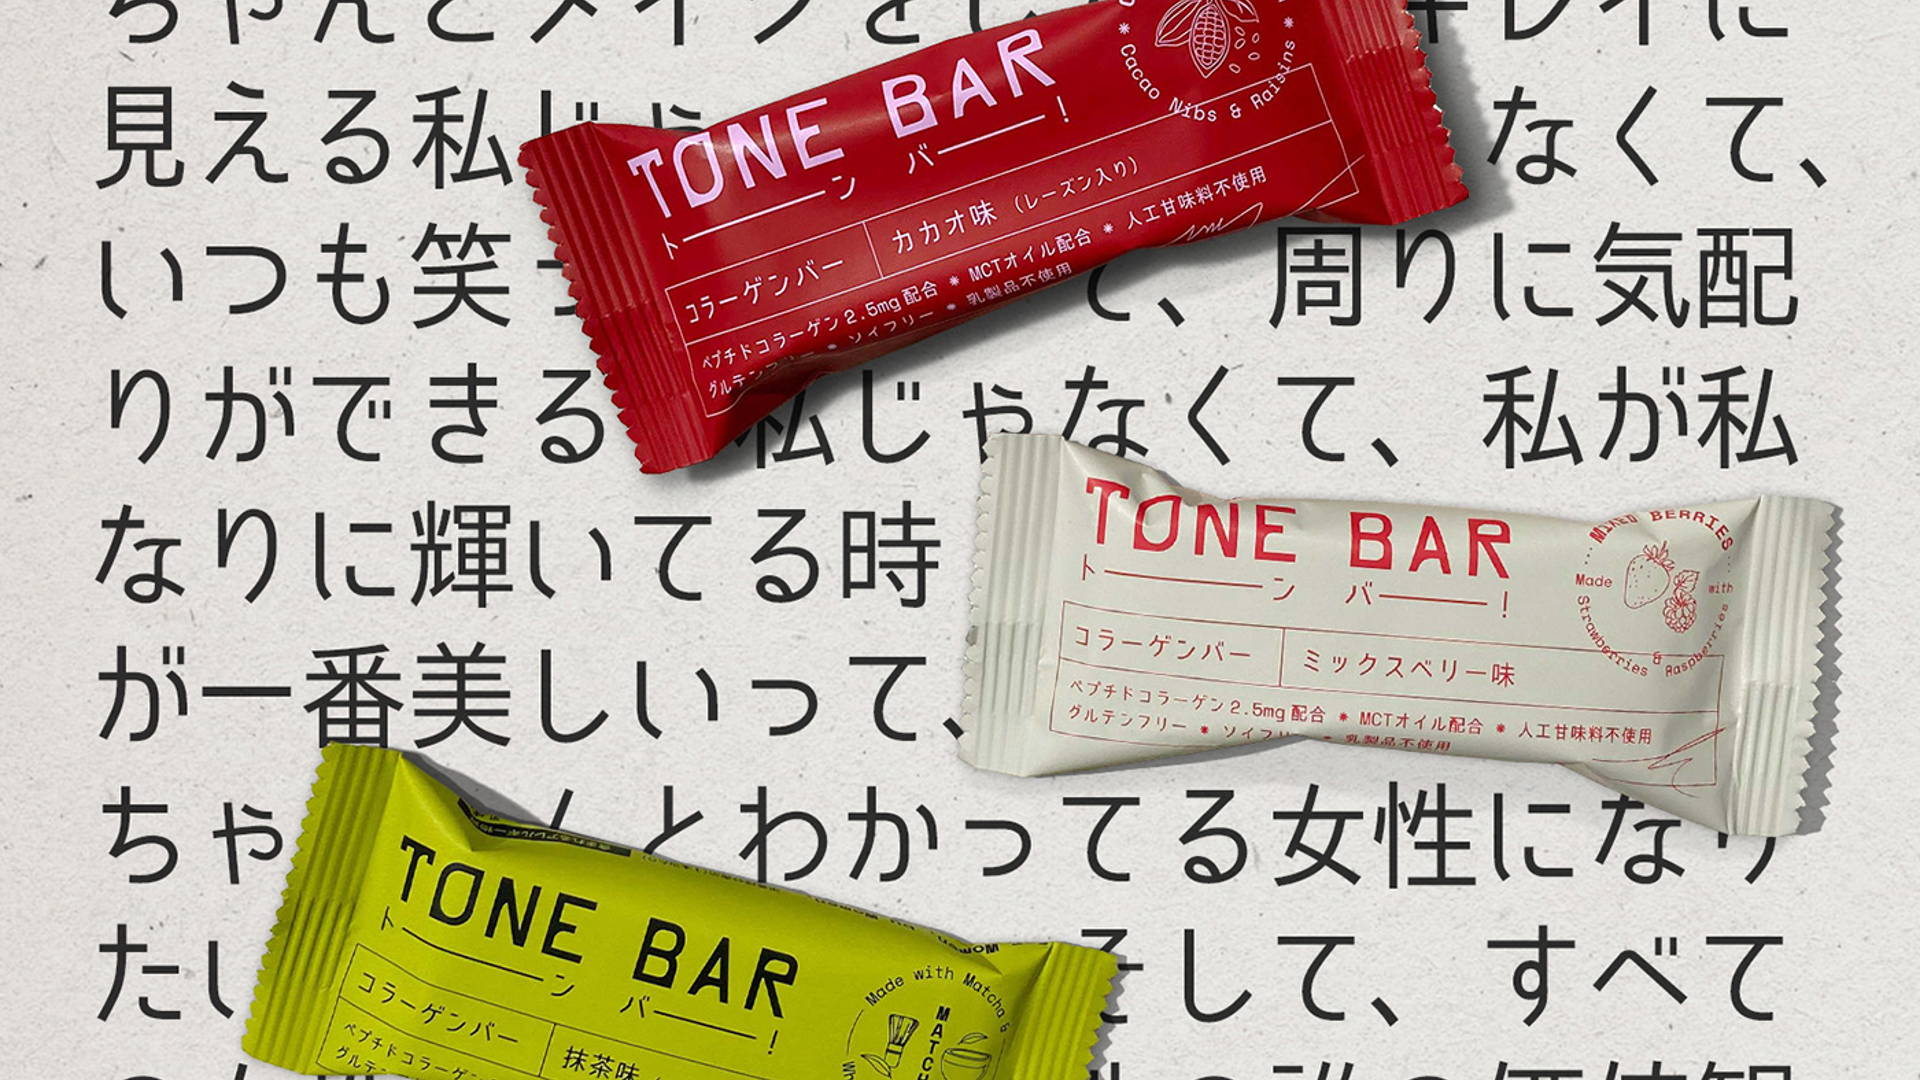 Featured image for TONE BAR Branding & Packaging Design Sets The Bar For Bar Packaging